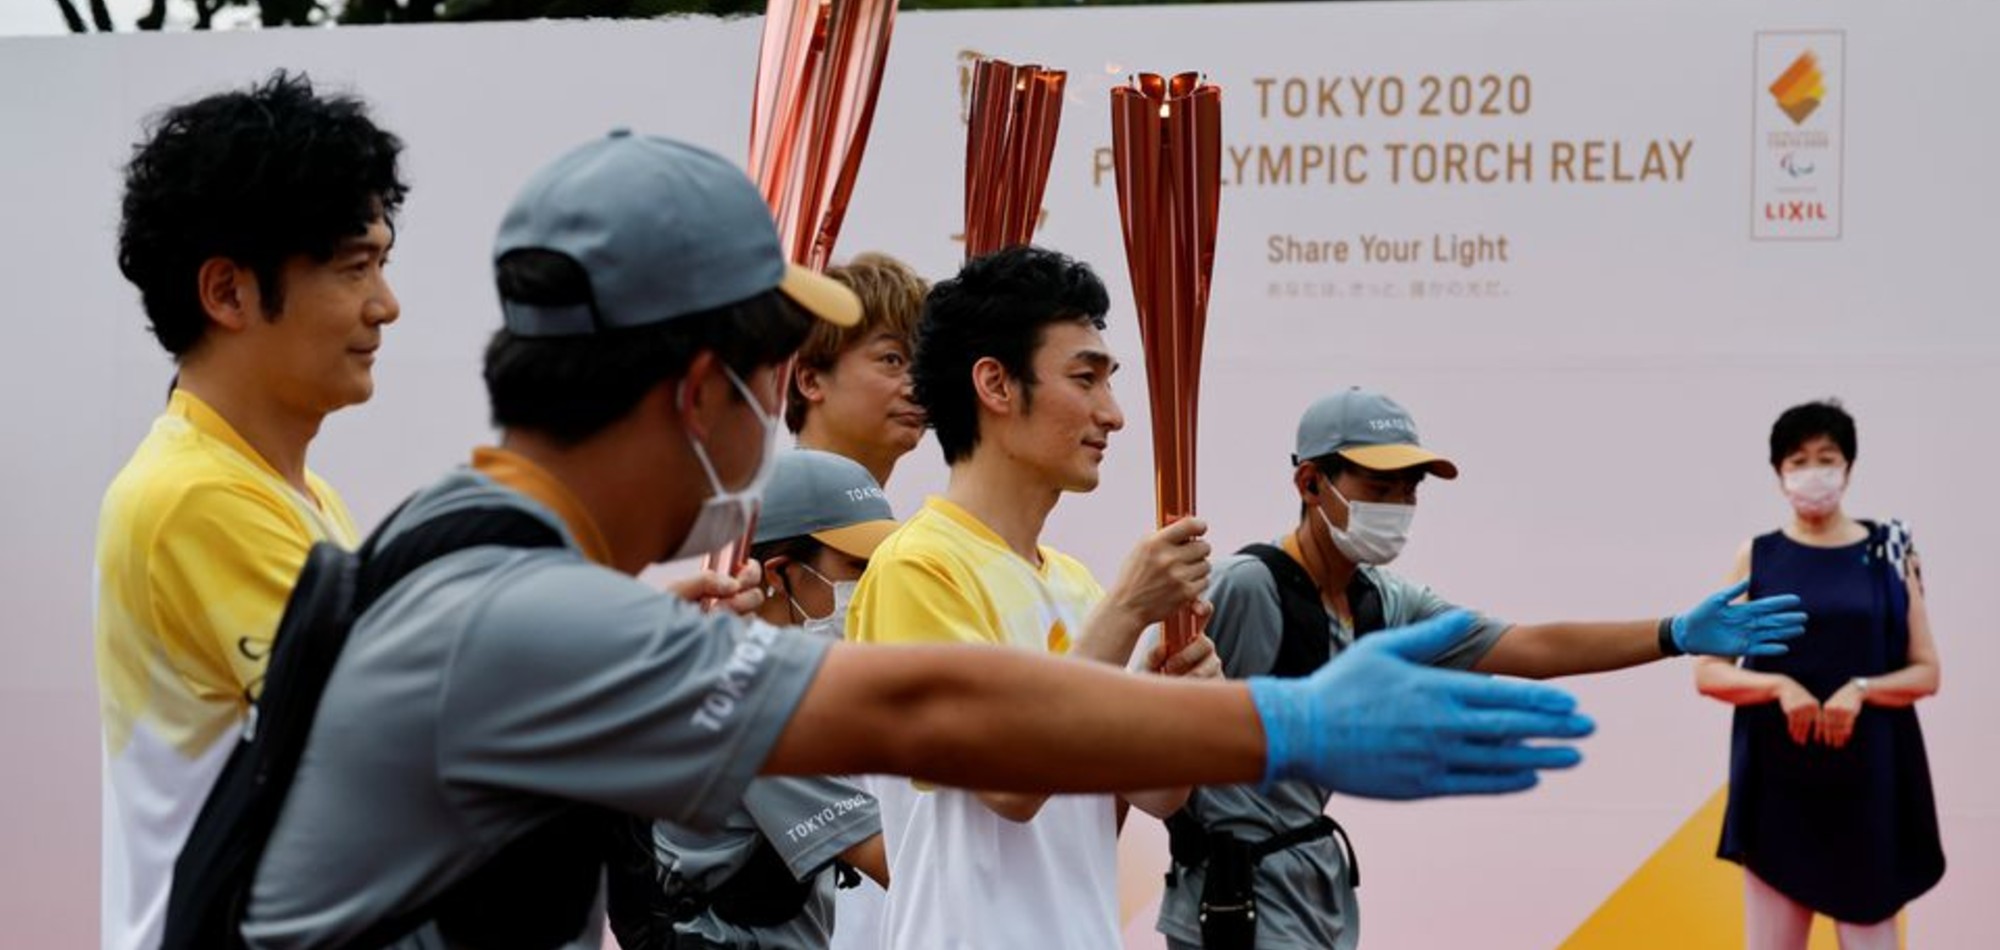 Paralympics set to open in Tokyo amid surging COVID-19 cases